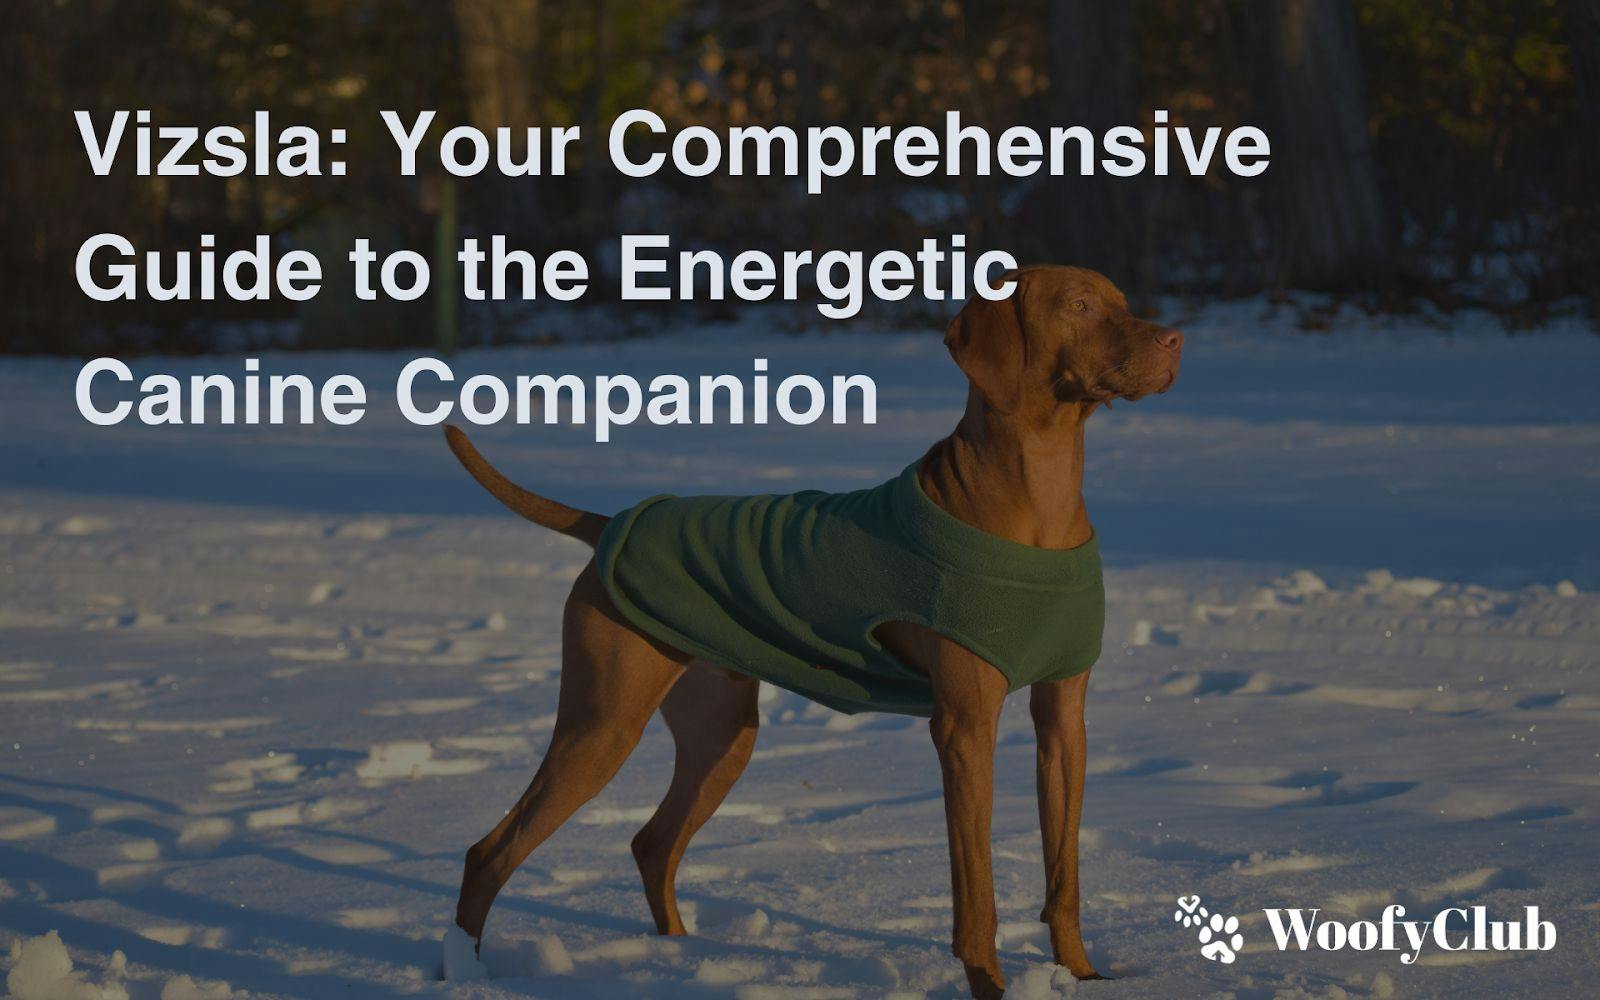 Vizsla: Your Comprehensive Guide To The Energetic Canine Companion